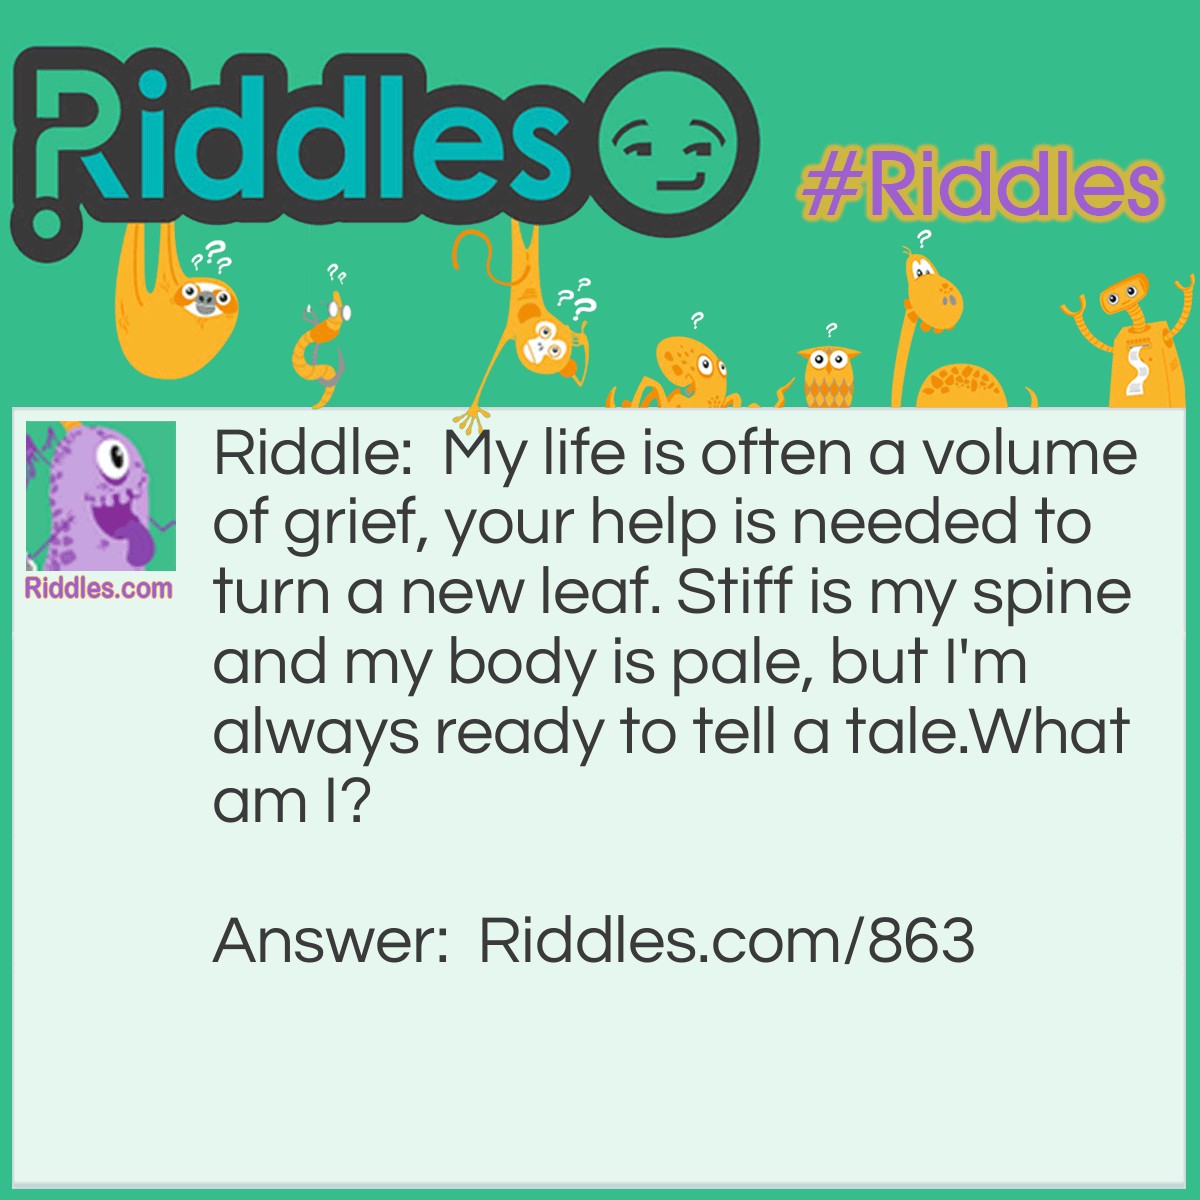 Riddle: My life is often a volume of grief, your help is needed to turn a new leaf. Stiff is my spine and my body is pale, but I'm always ready to tell a tale.
What am I? Answer: A book!